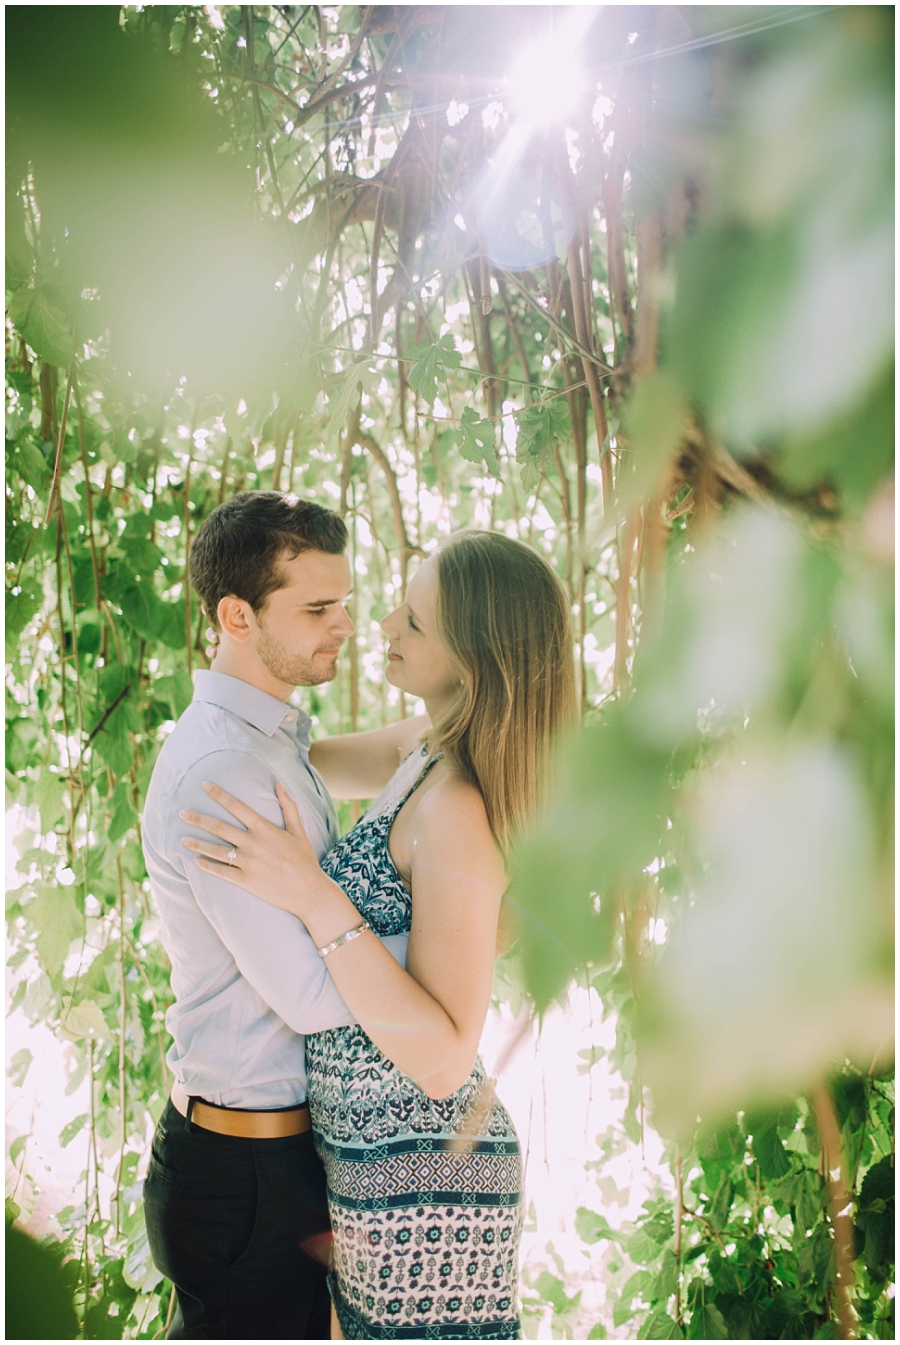 Ronel Kruger Cape Town Wedding and Lifestyle Photographer_8445.jpg